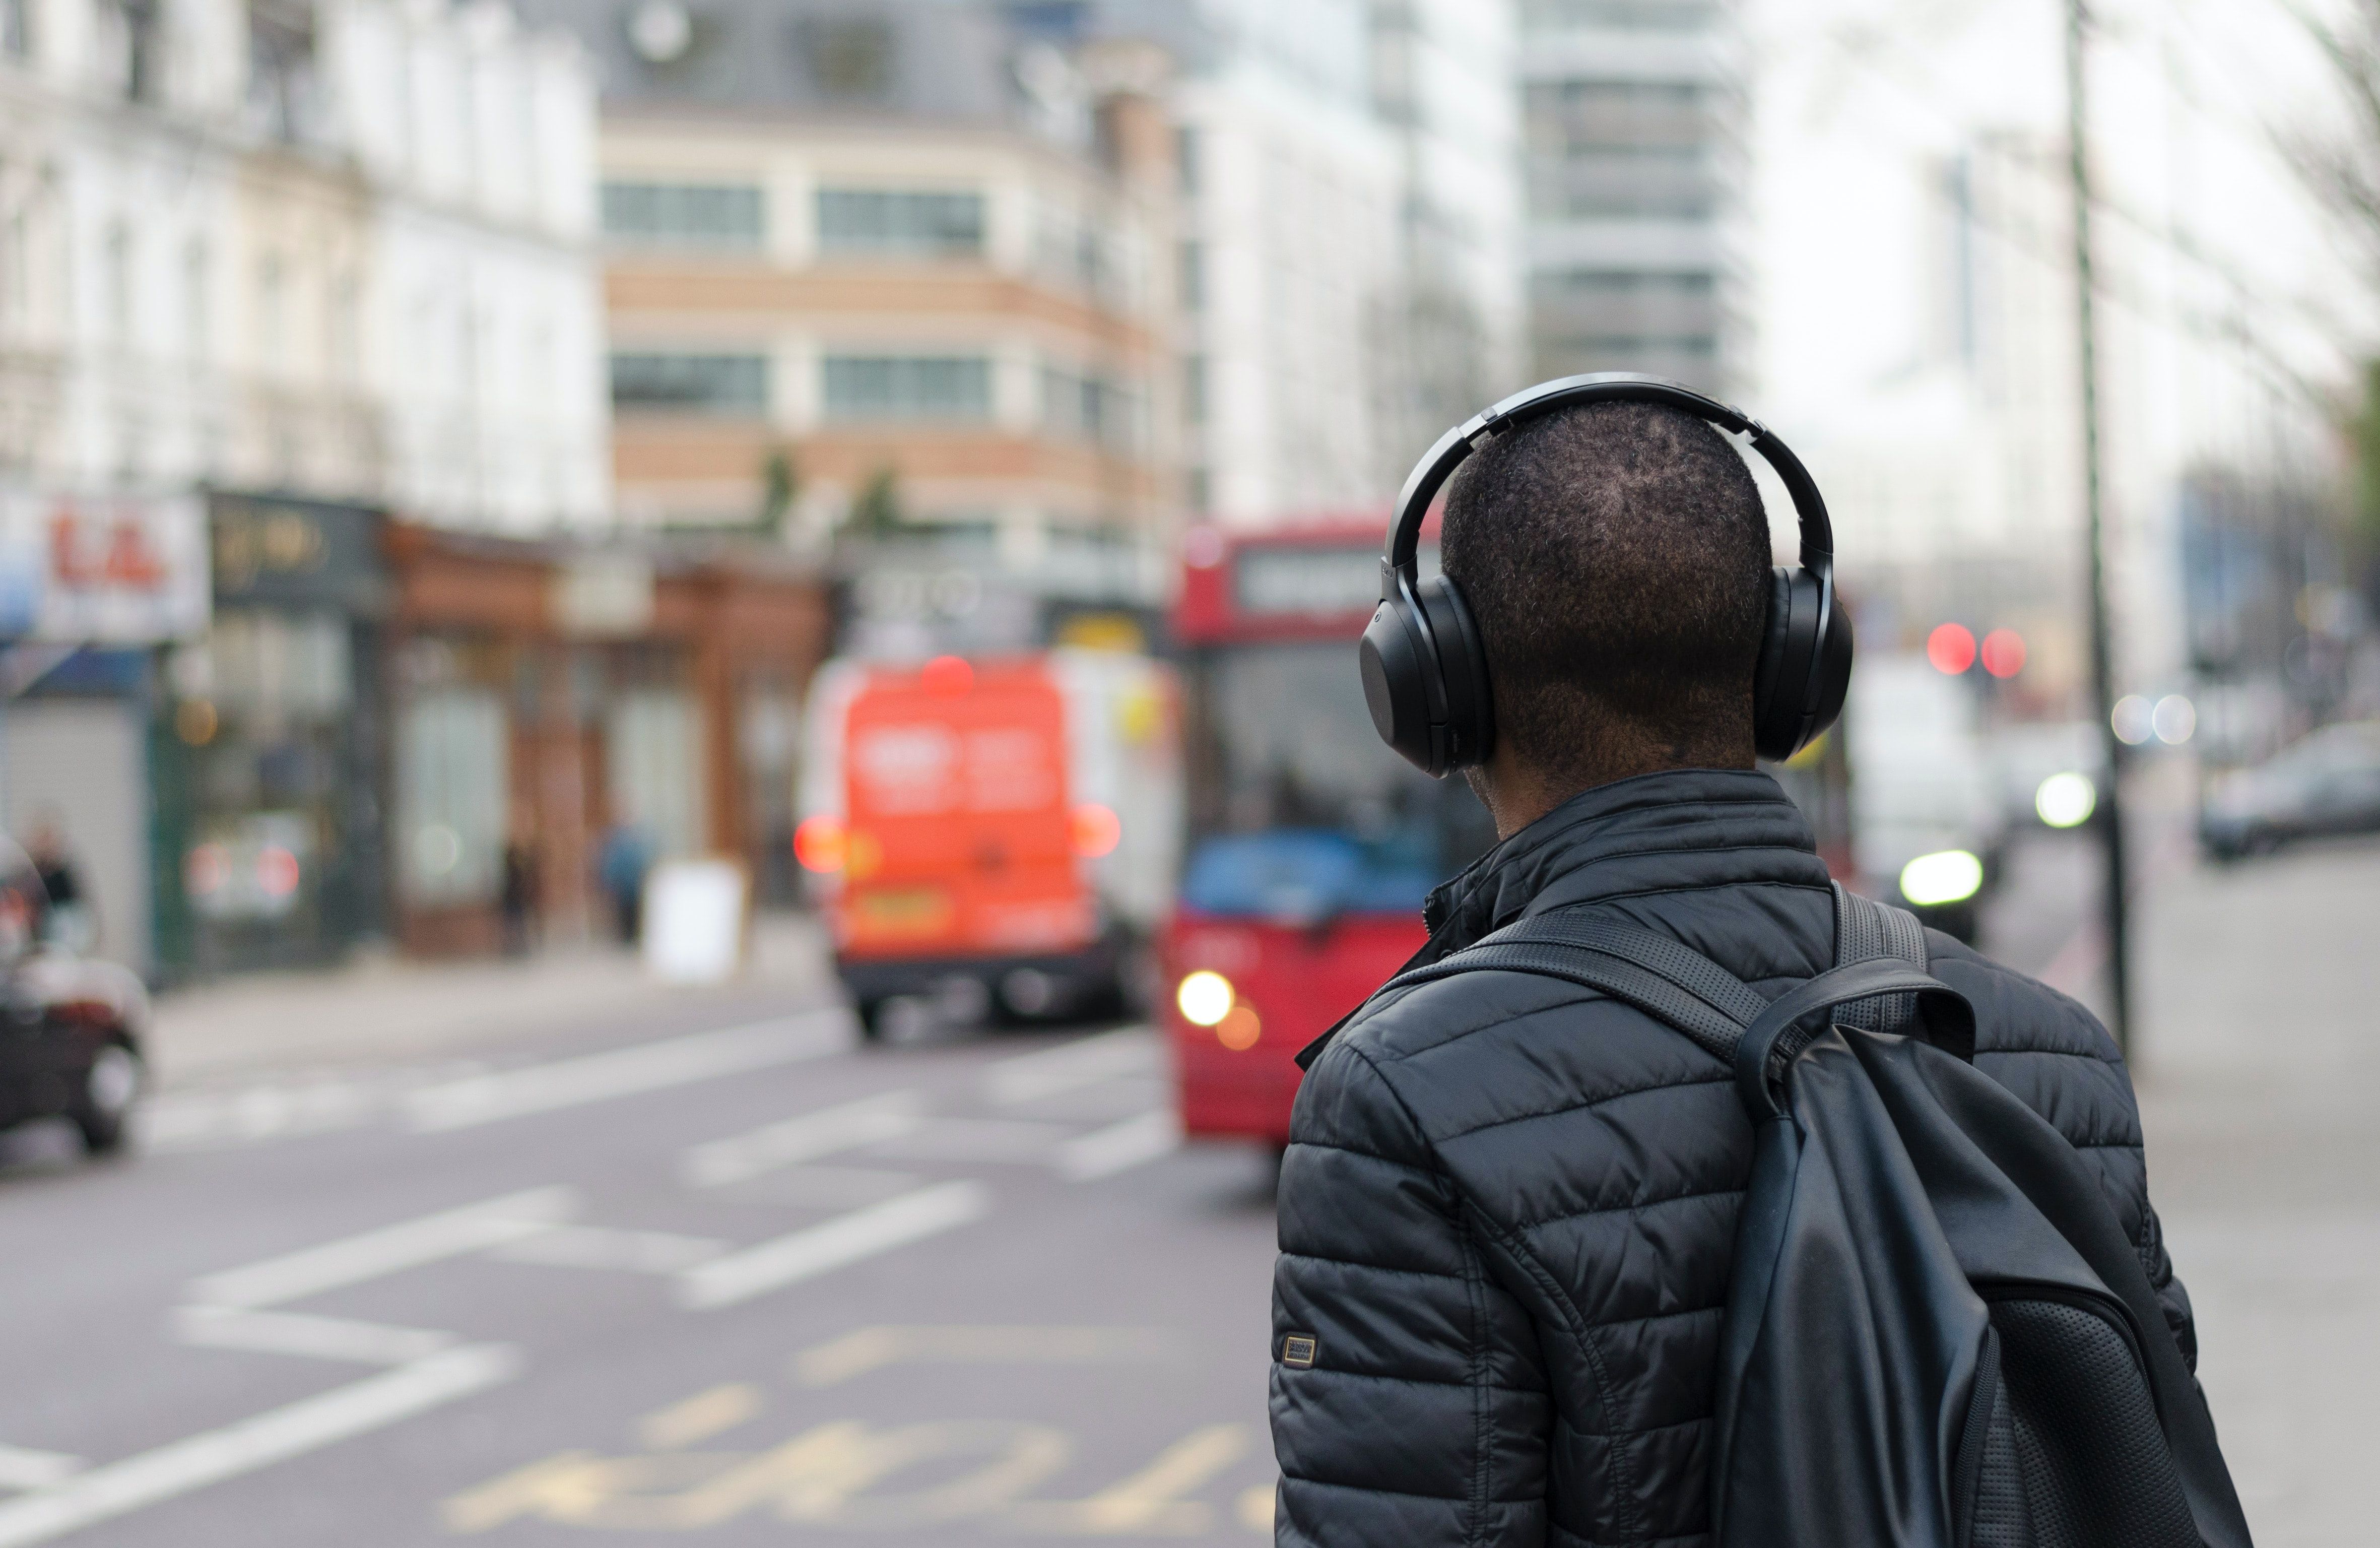 Photo of a person listening to music while waiting for a bus